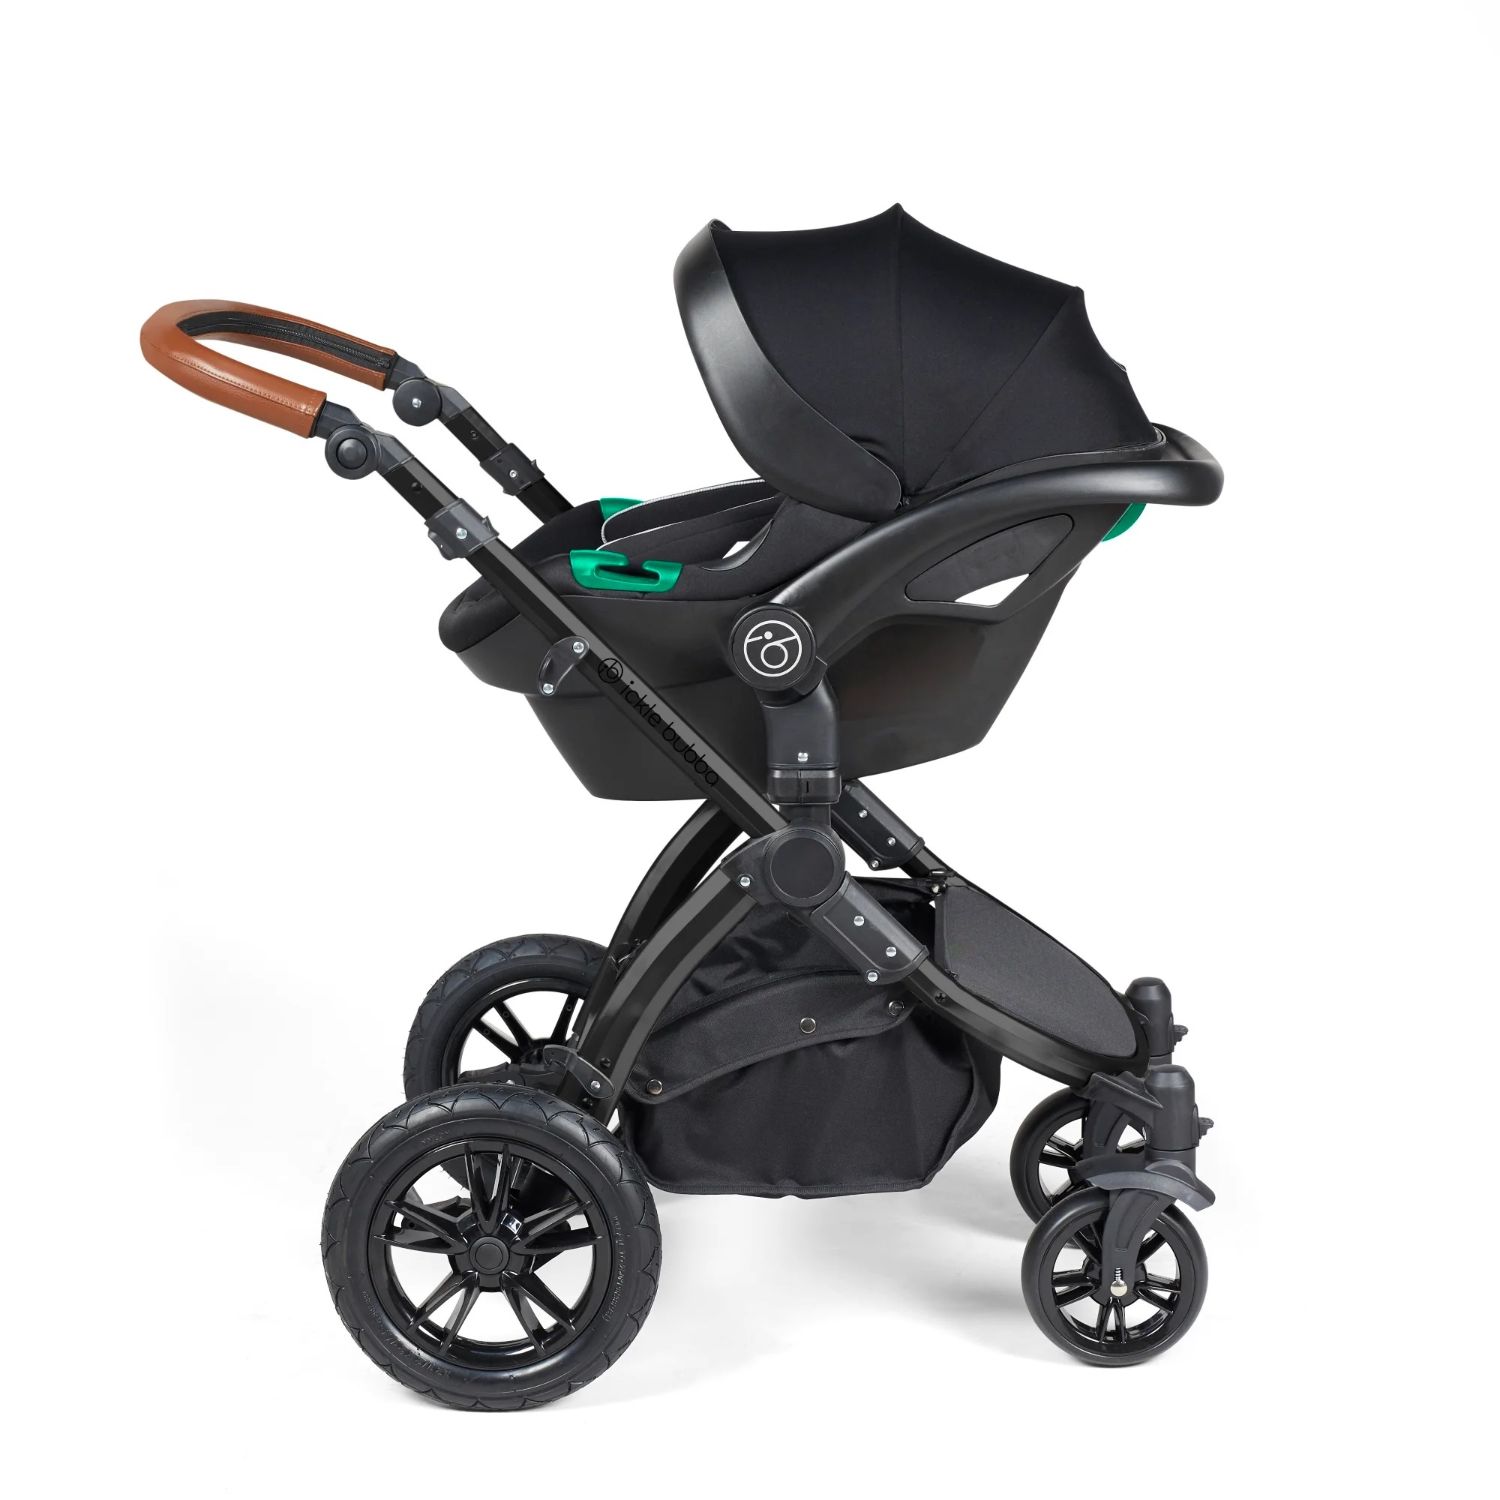 Ickle Bubba Stomp Luxe Pushchair with Stratus i-Size car seat attached in Charcoal Grey colour with tan handle